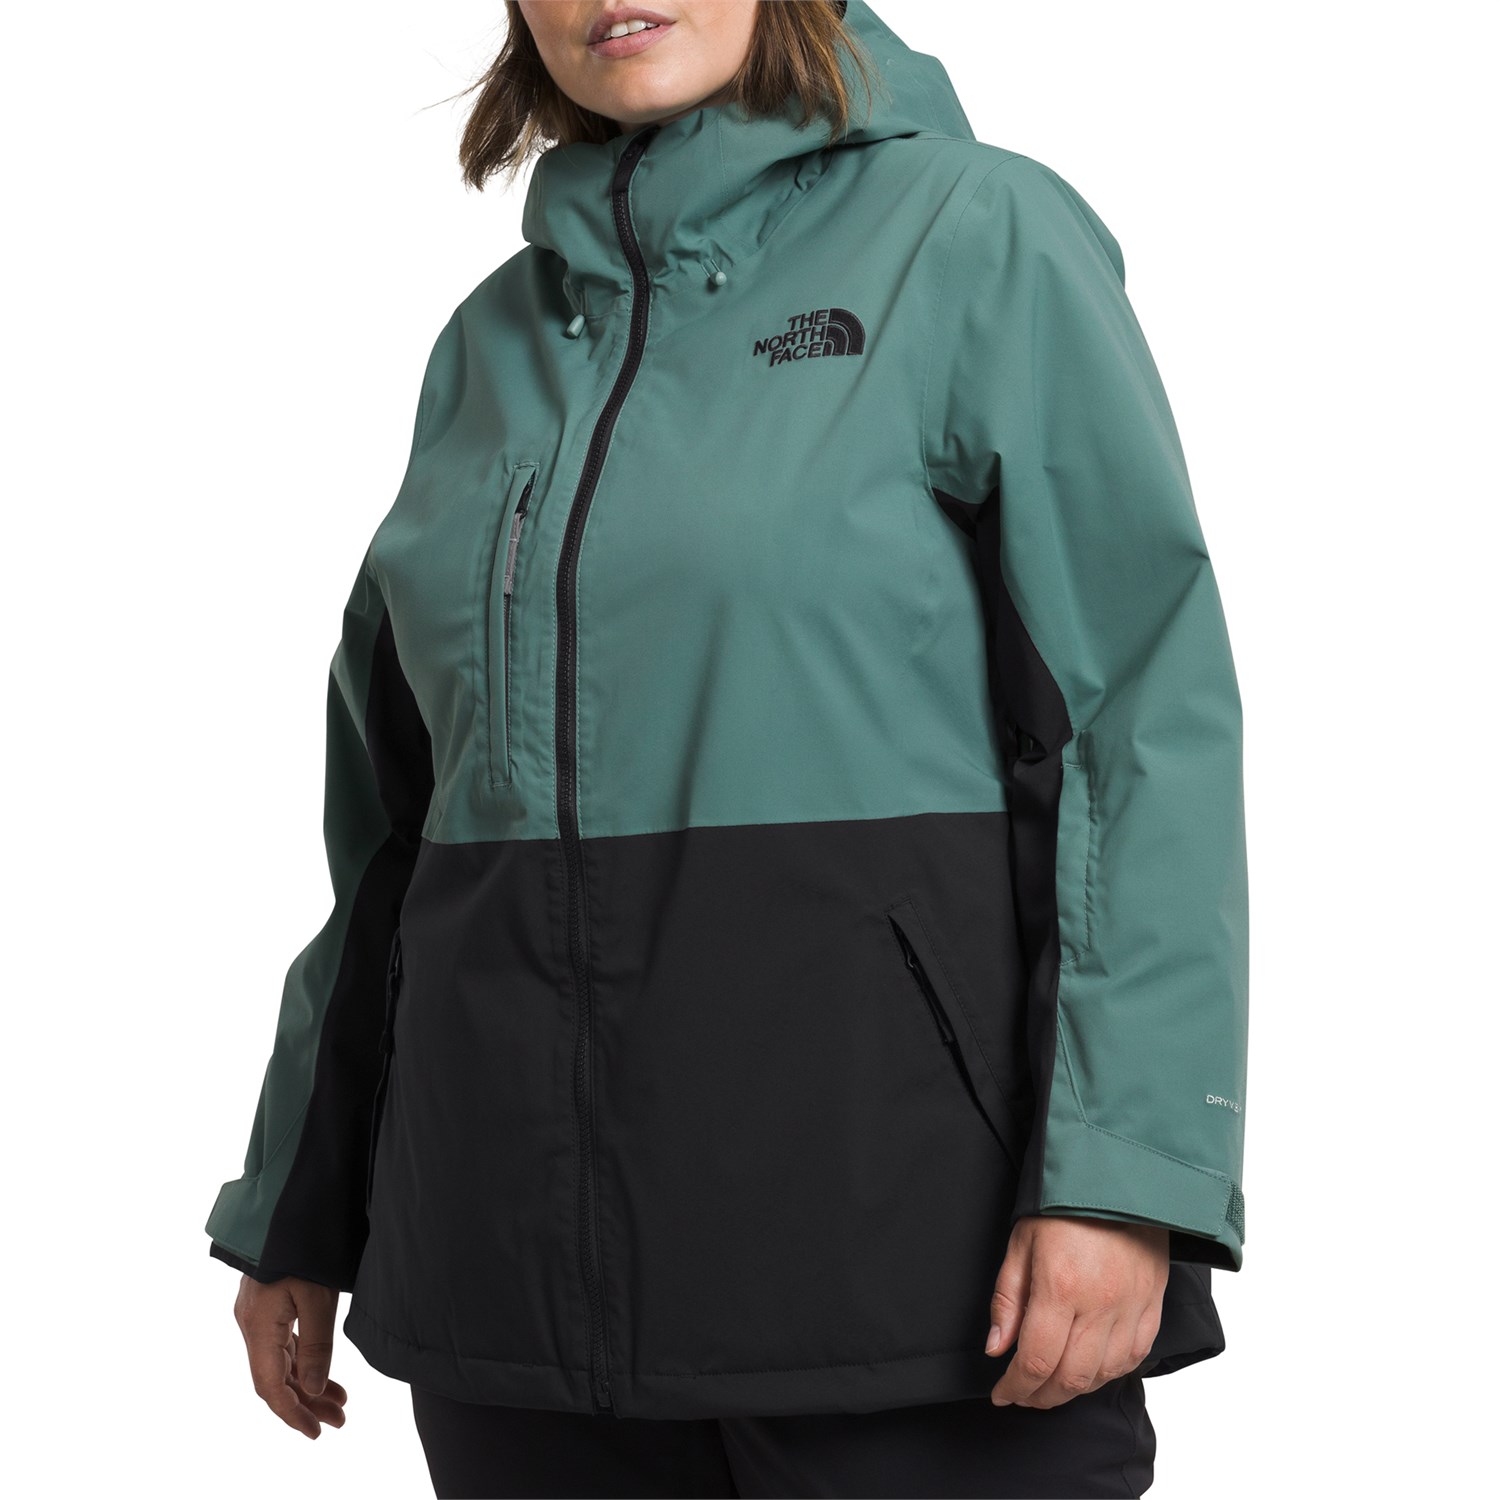 THE NORTH FACE Women's Freedom Stretch Jacket